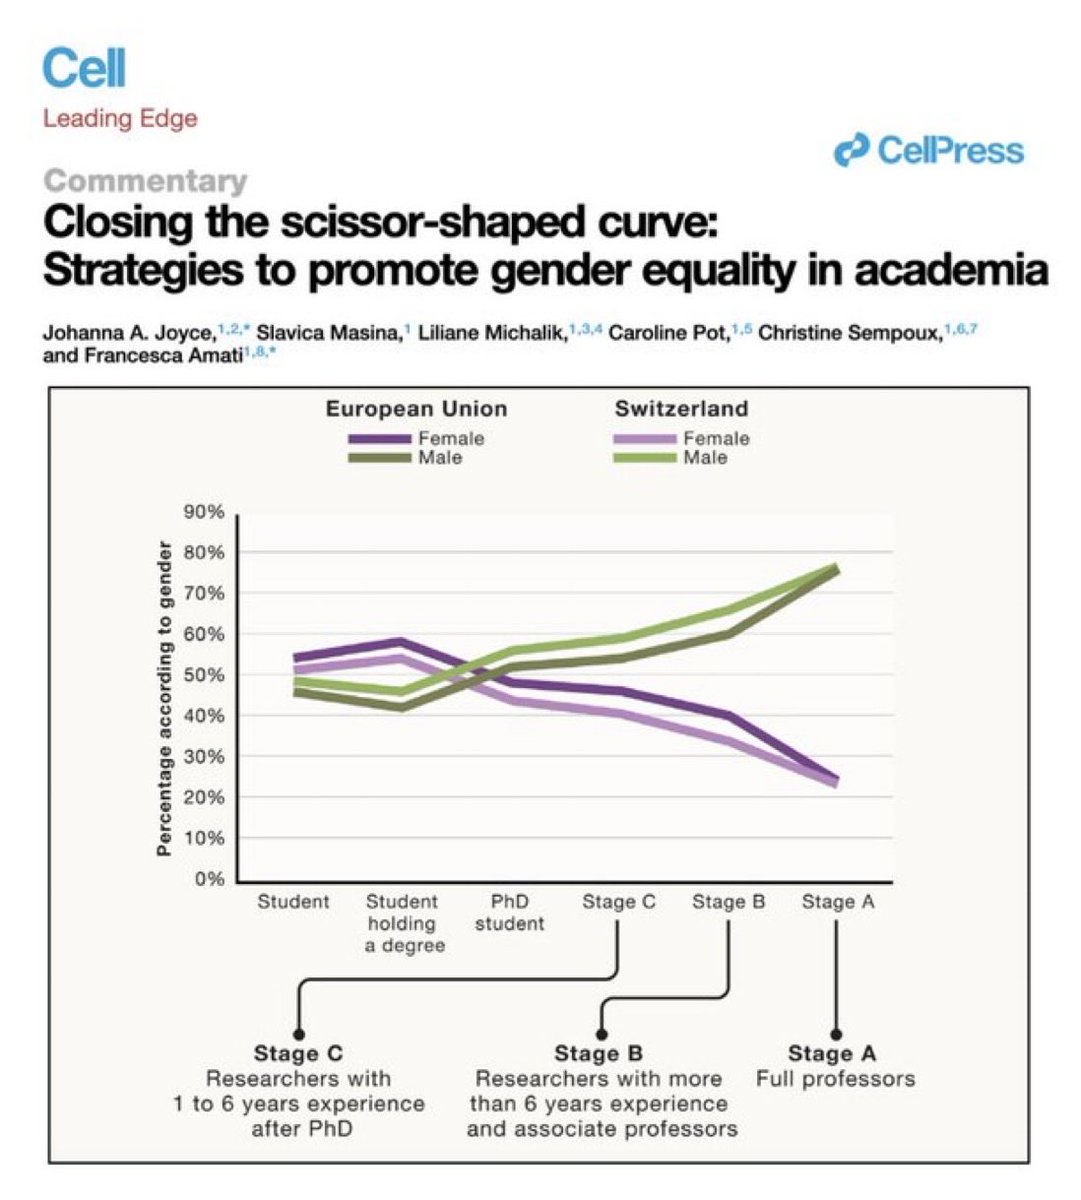 Despite advances, women still encounter obstacles in pursuing academic careers and reaching lead- ership positions. This commentary discusses the 'scissor-shaped curve' and examines effective strategies to fix it.